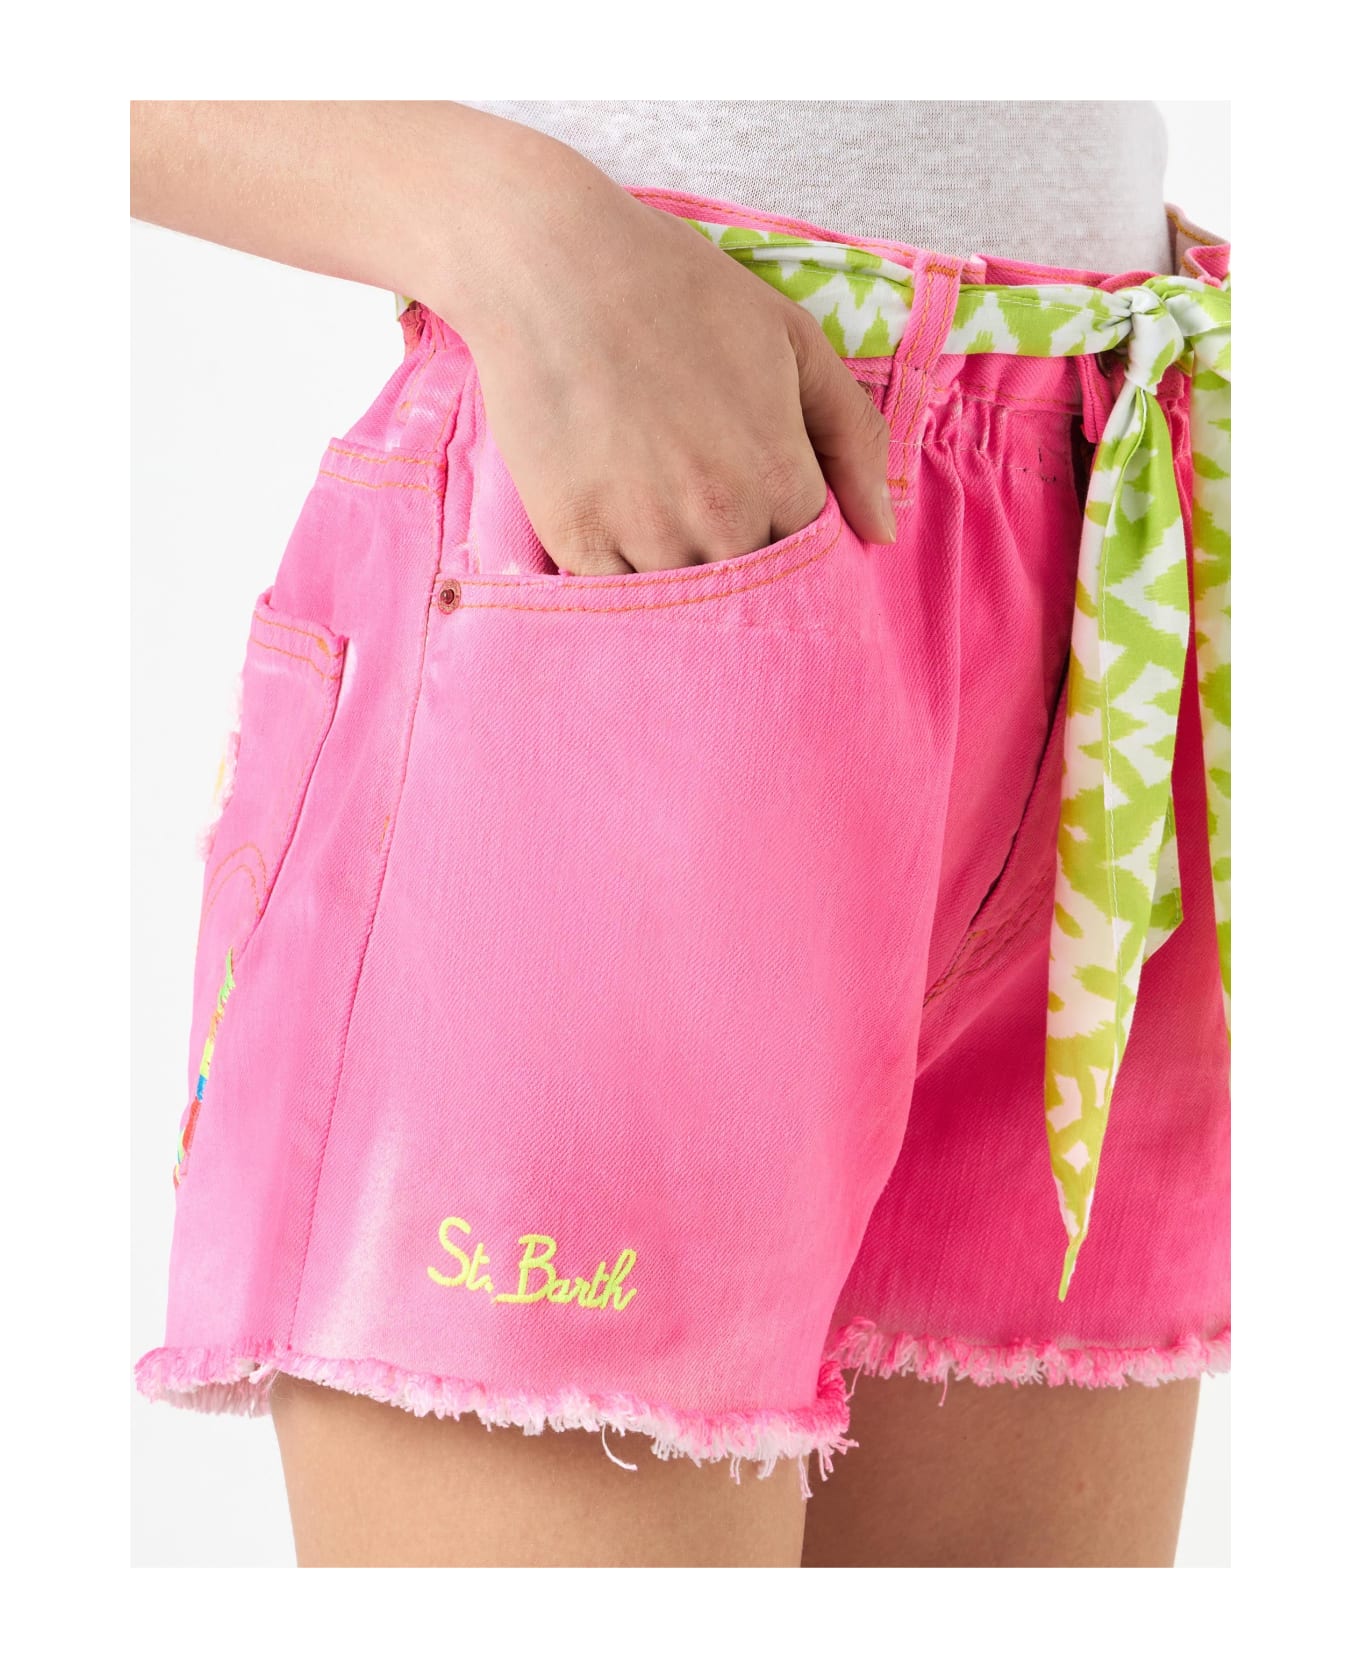 MC2 Saint Barth Woman Upcycled Pink Denim Shorts With Embroidery - PINK